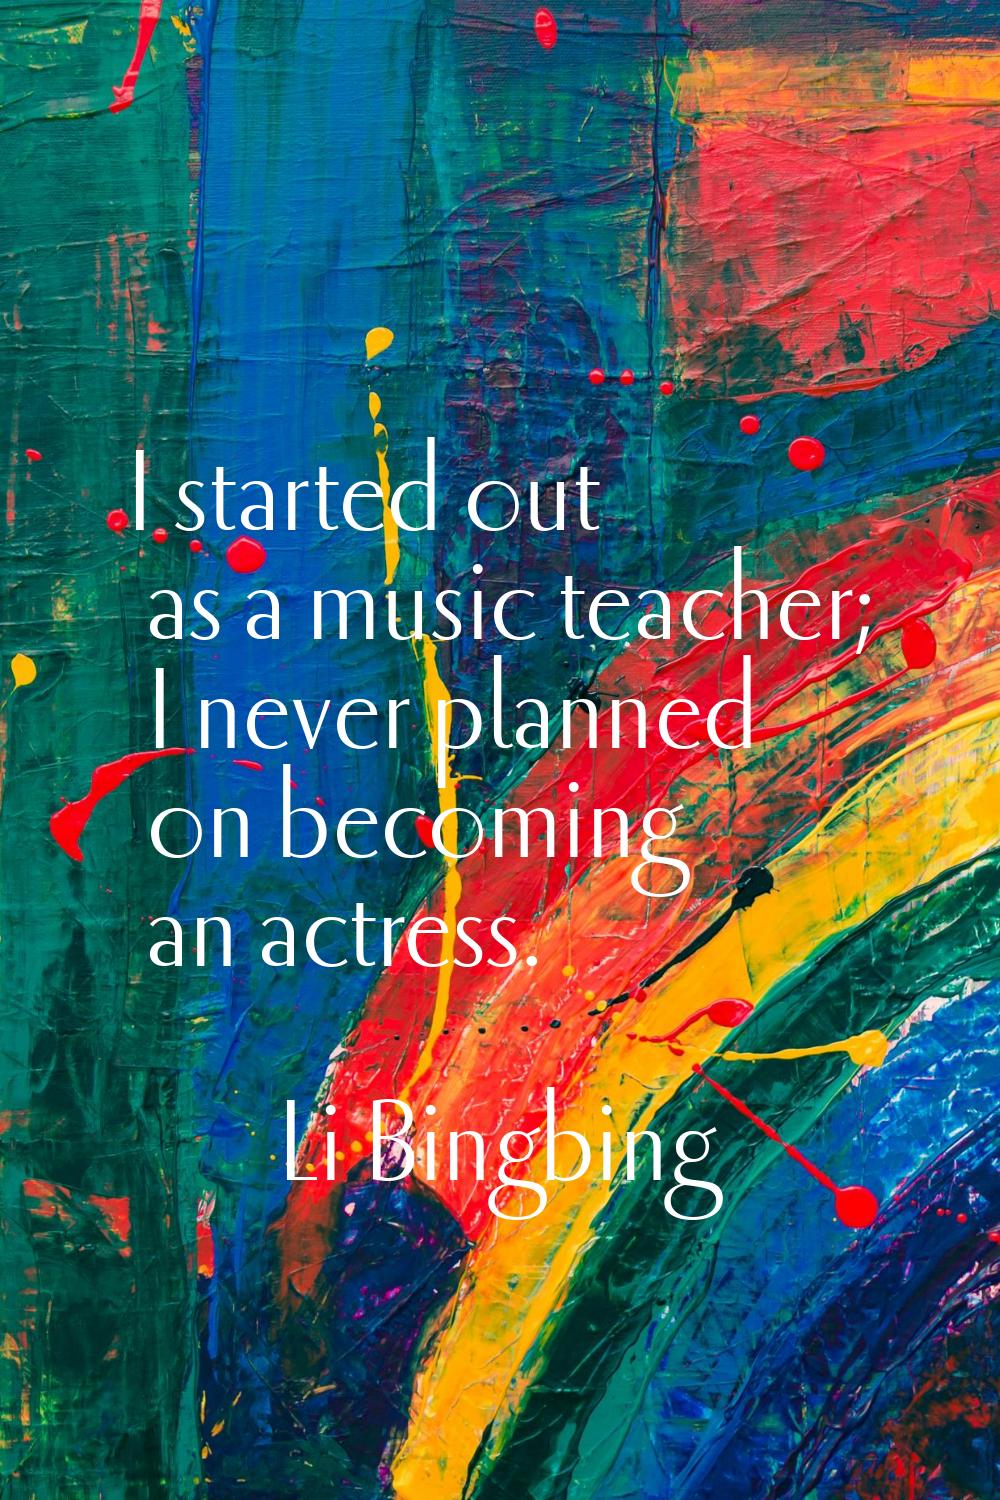 I started out as a music teacher; I never planned on becoming an actress.